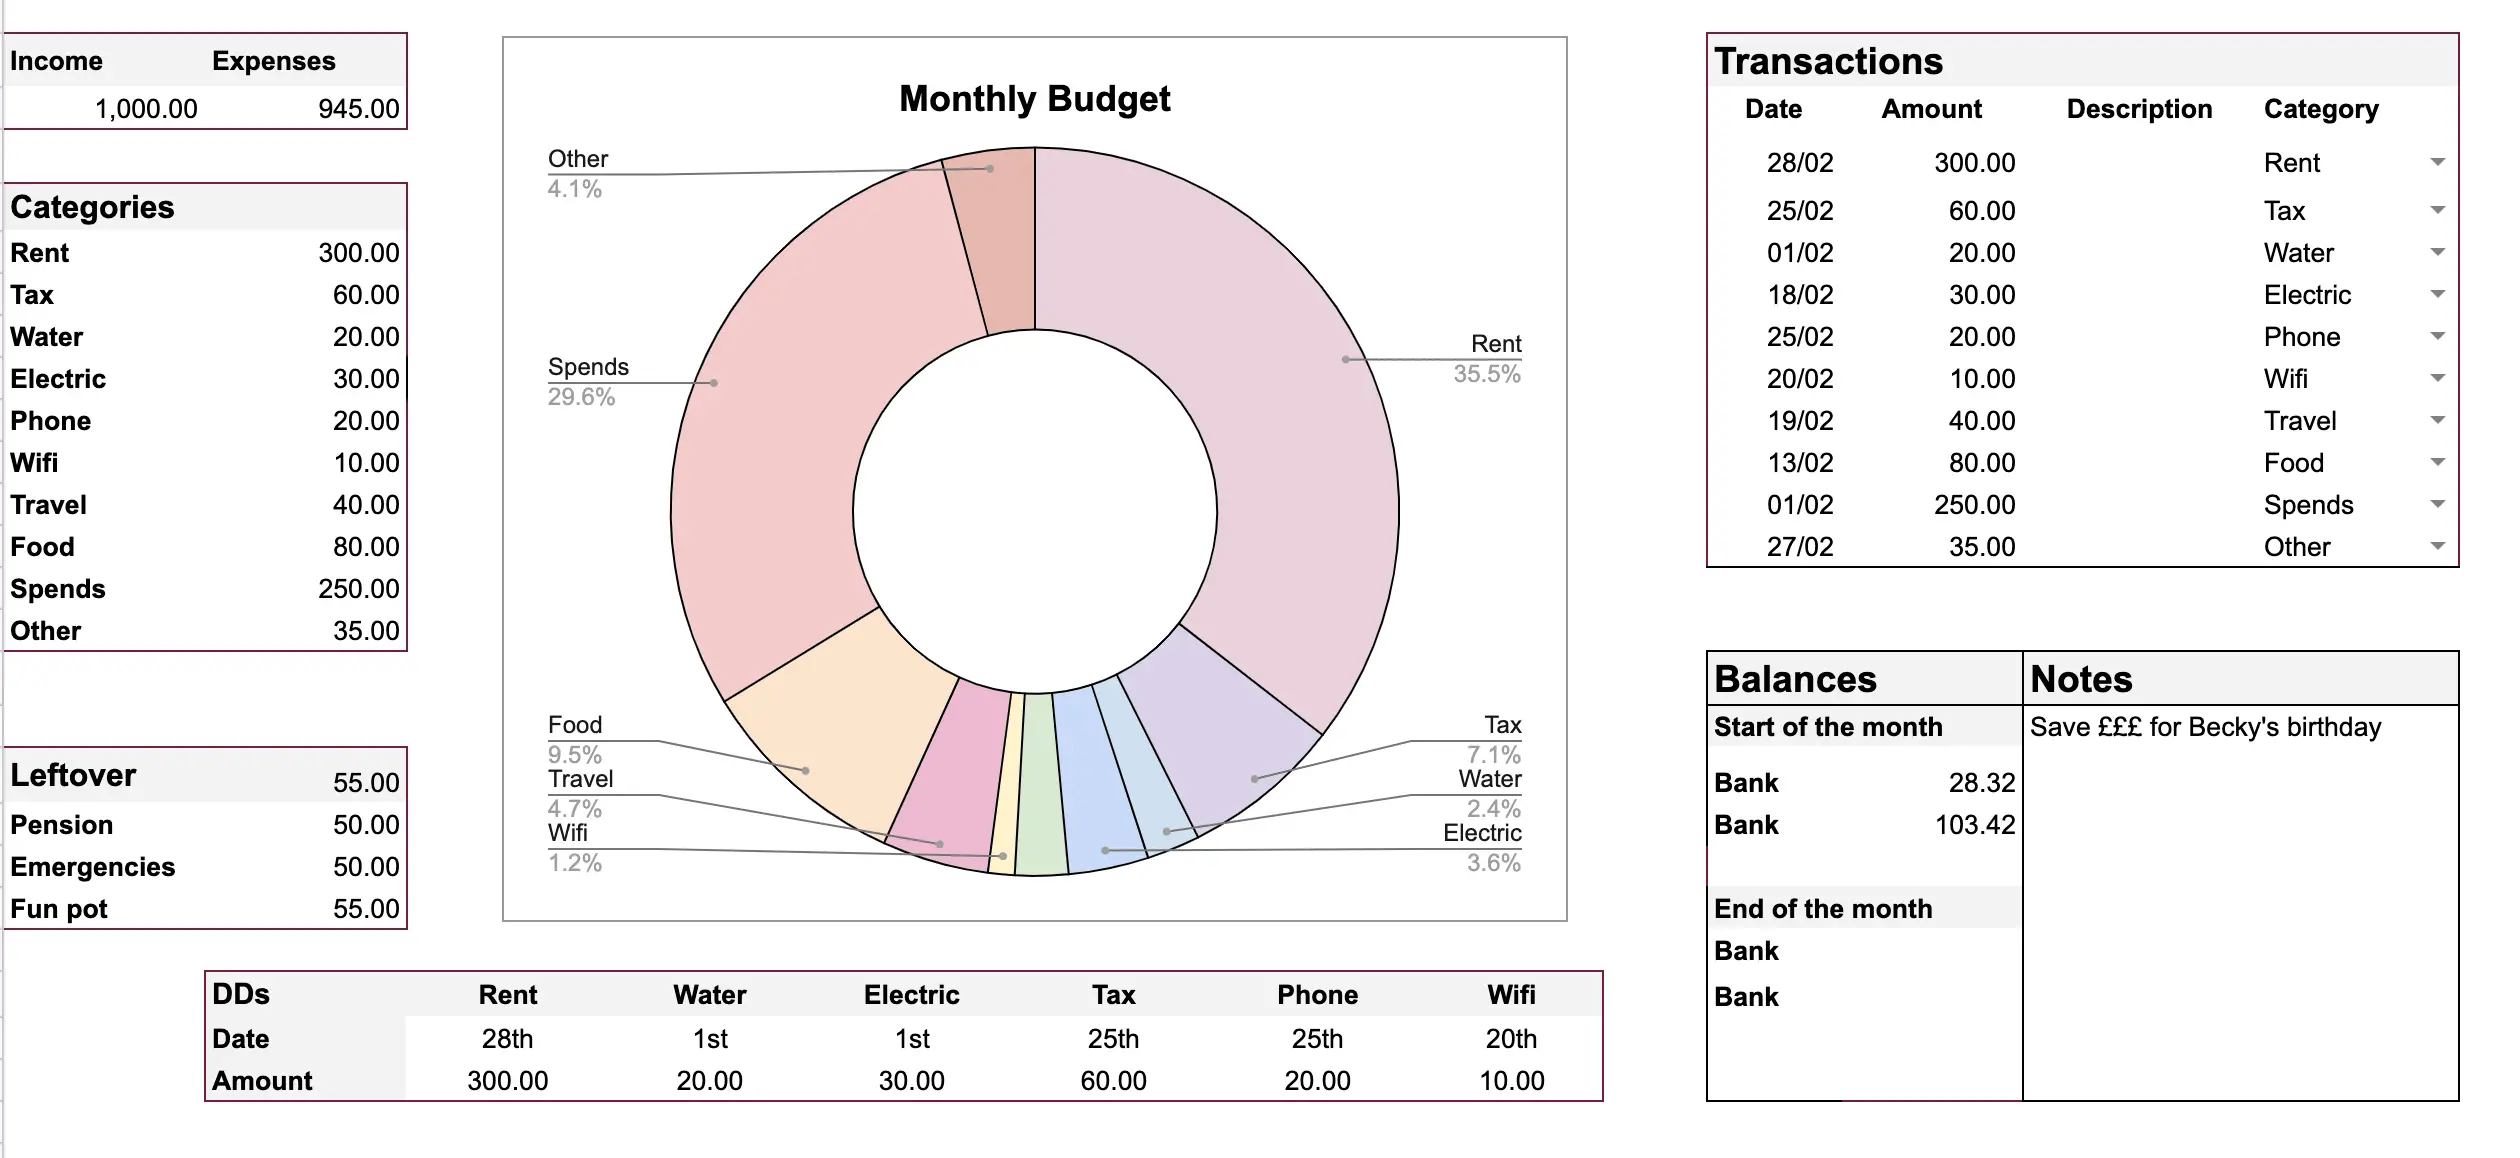 Monthly budget template